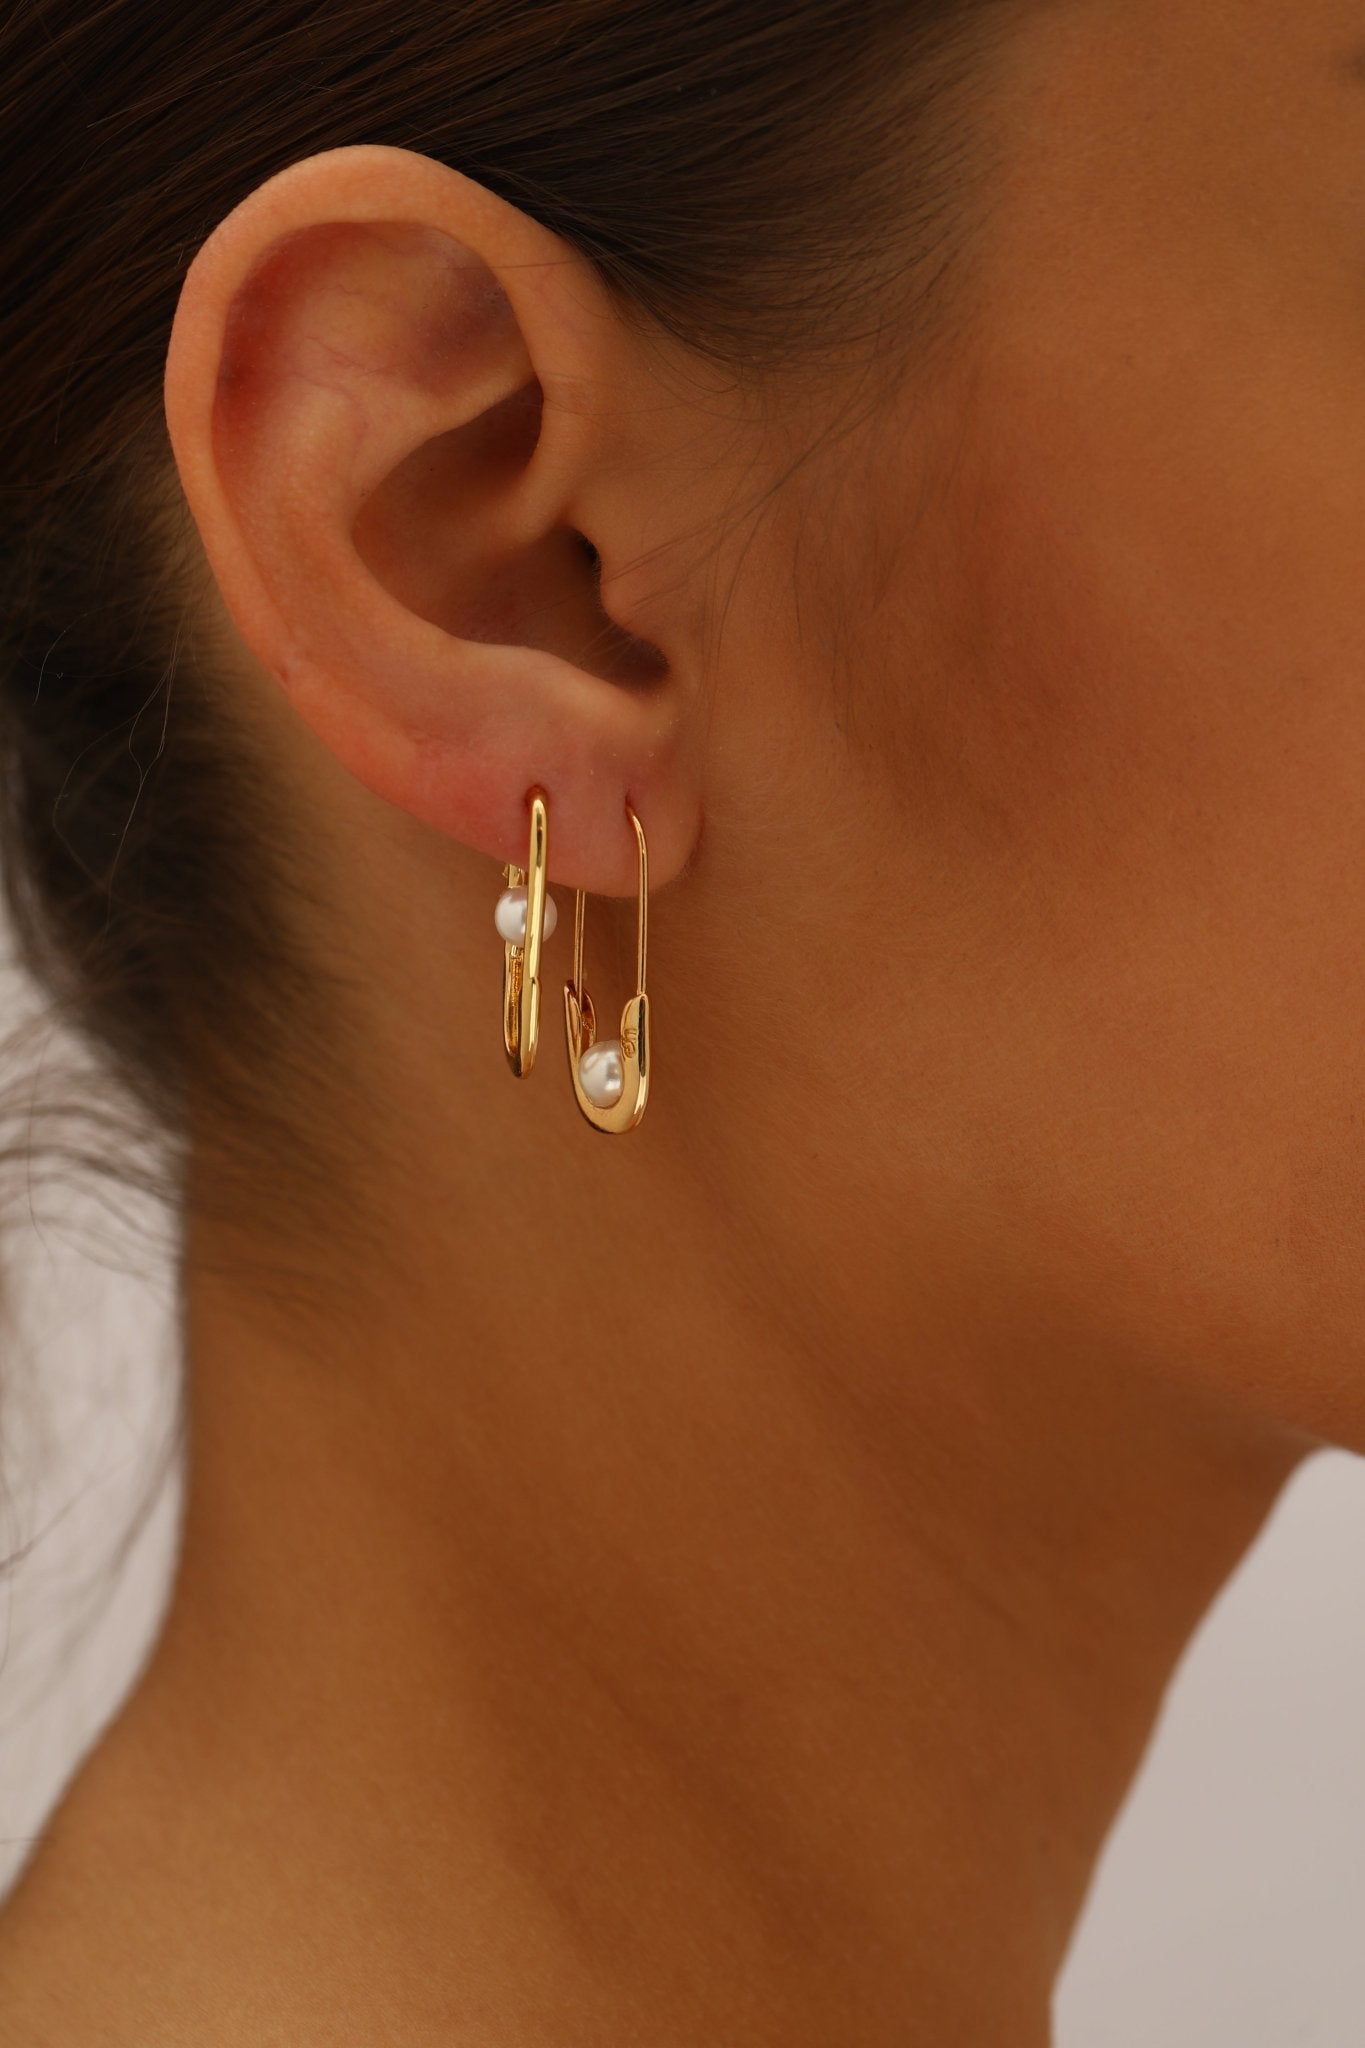 Safety Pin Earrings Set